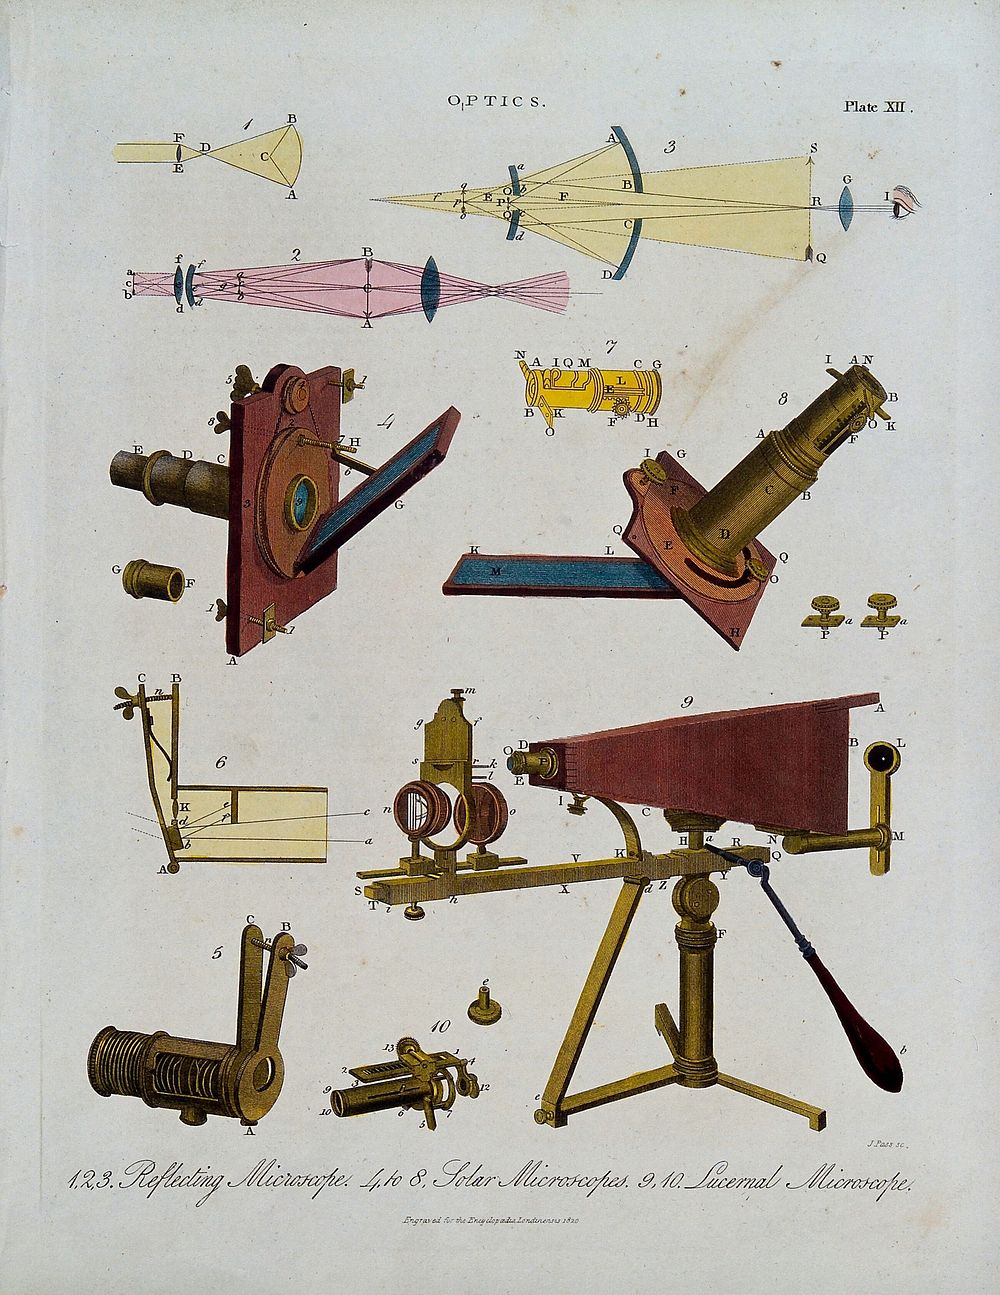 Optics: various microscopes. Coloured engraving by J. Pass, 1820.